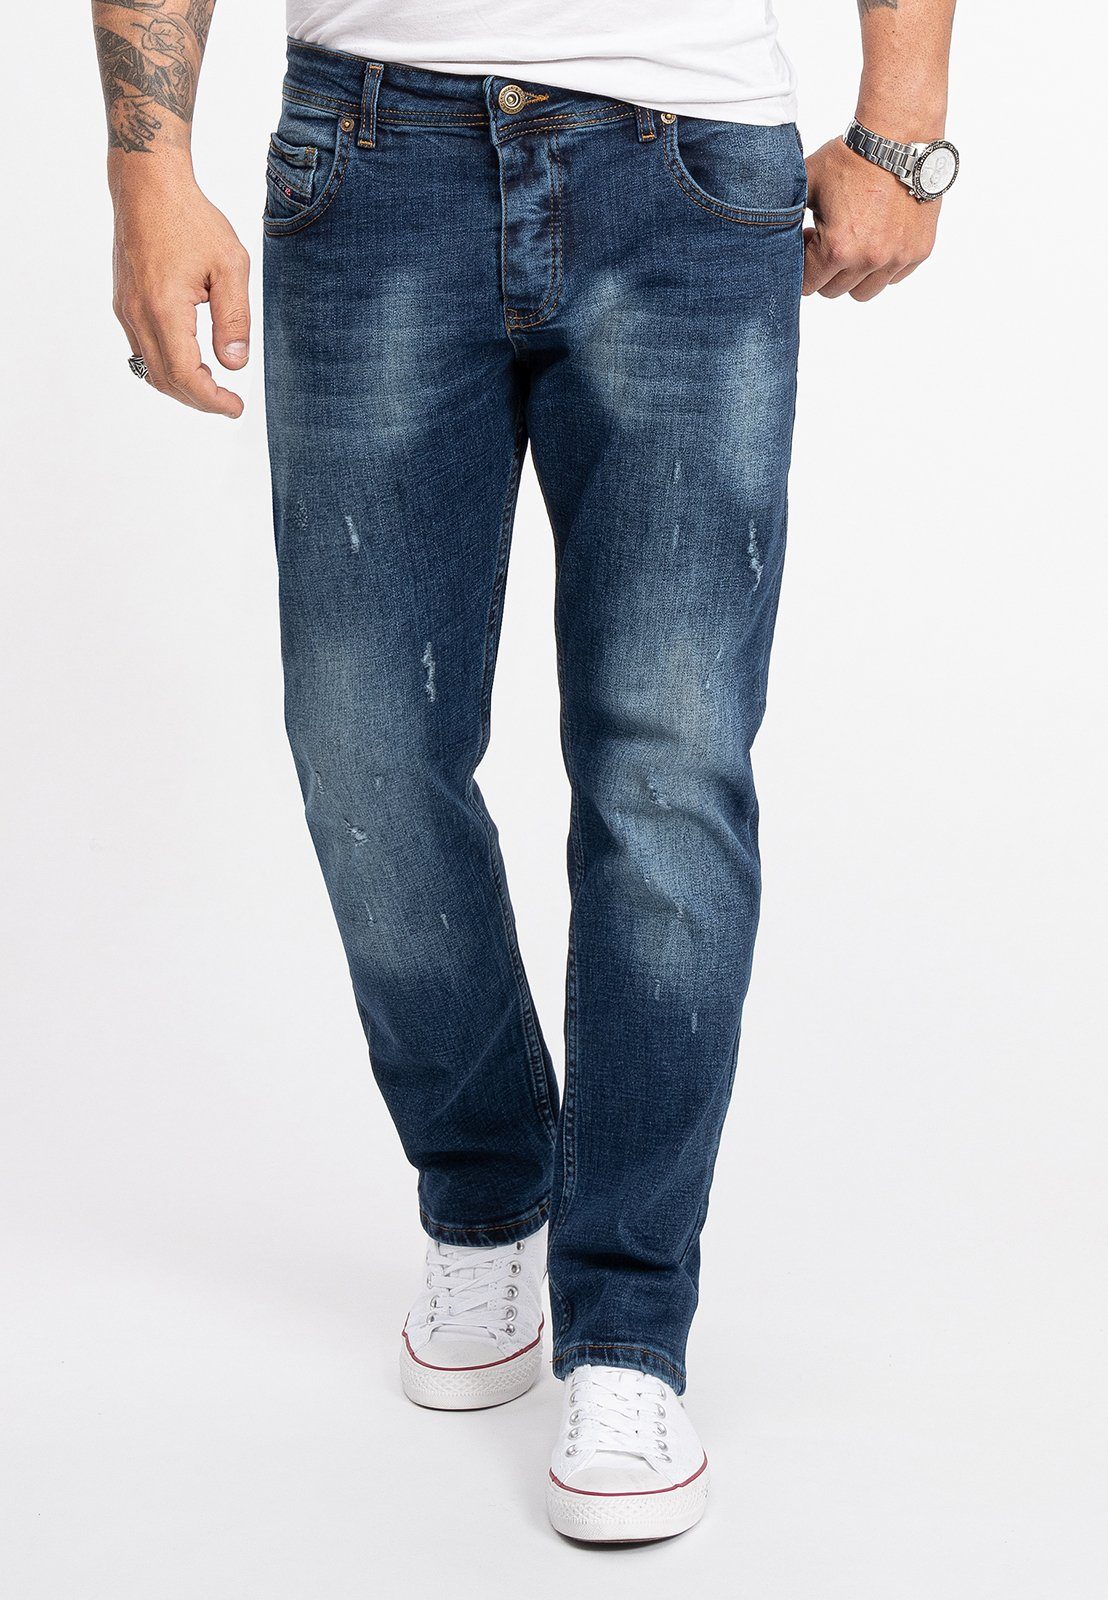 Rock Creek Straight-Jeans Herren Jeans Stonewashed Blau RC-2281 | Straight-Fit Jeans